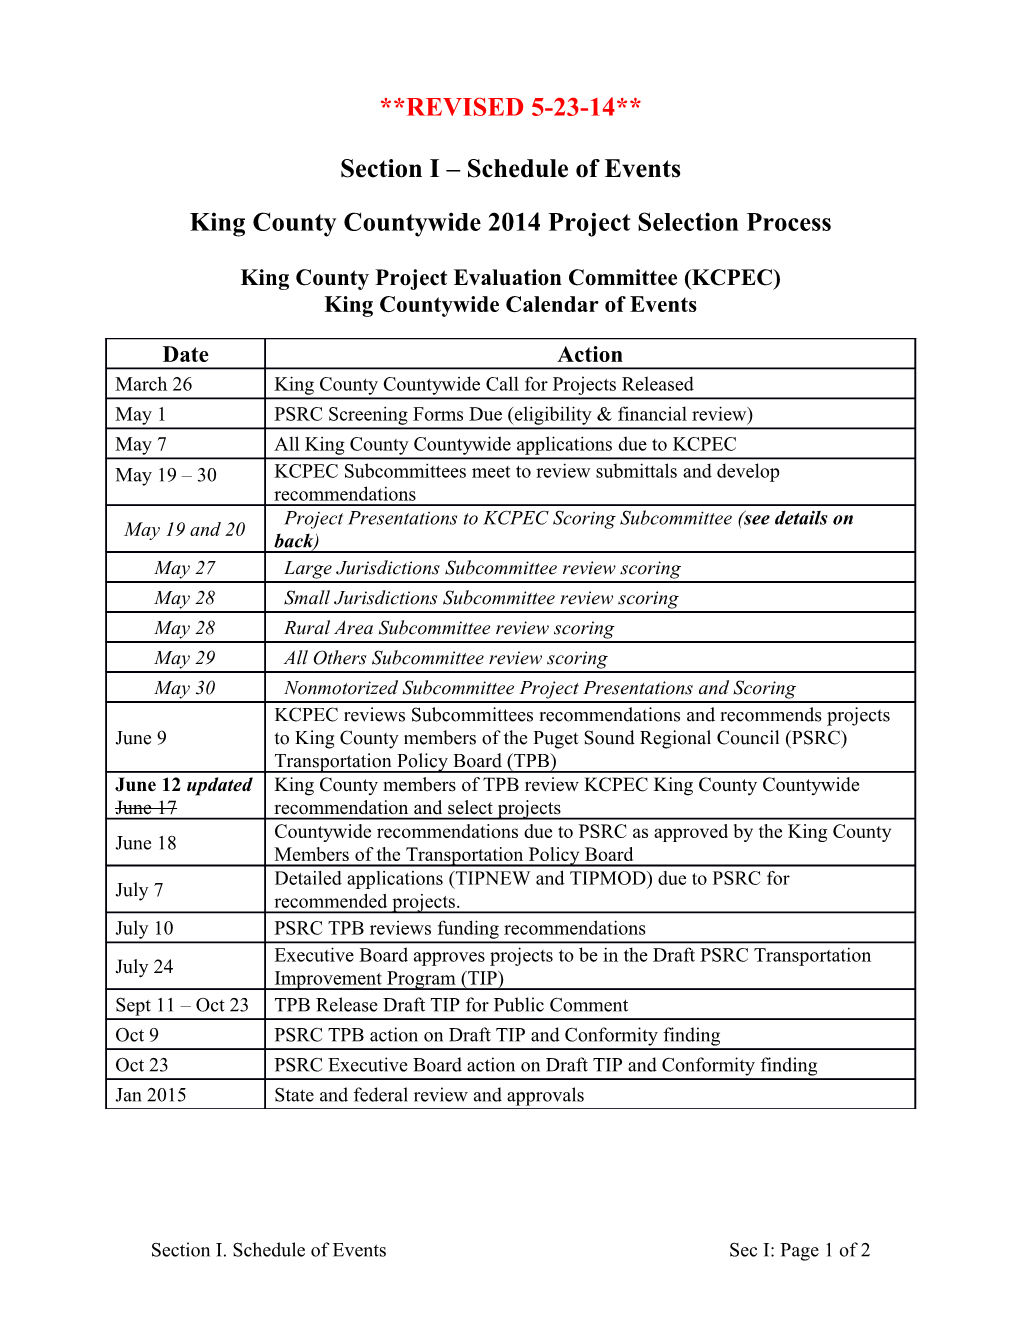 King County Countywide 2014Project Selection Process